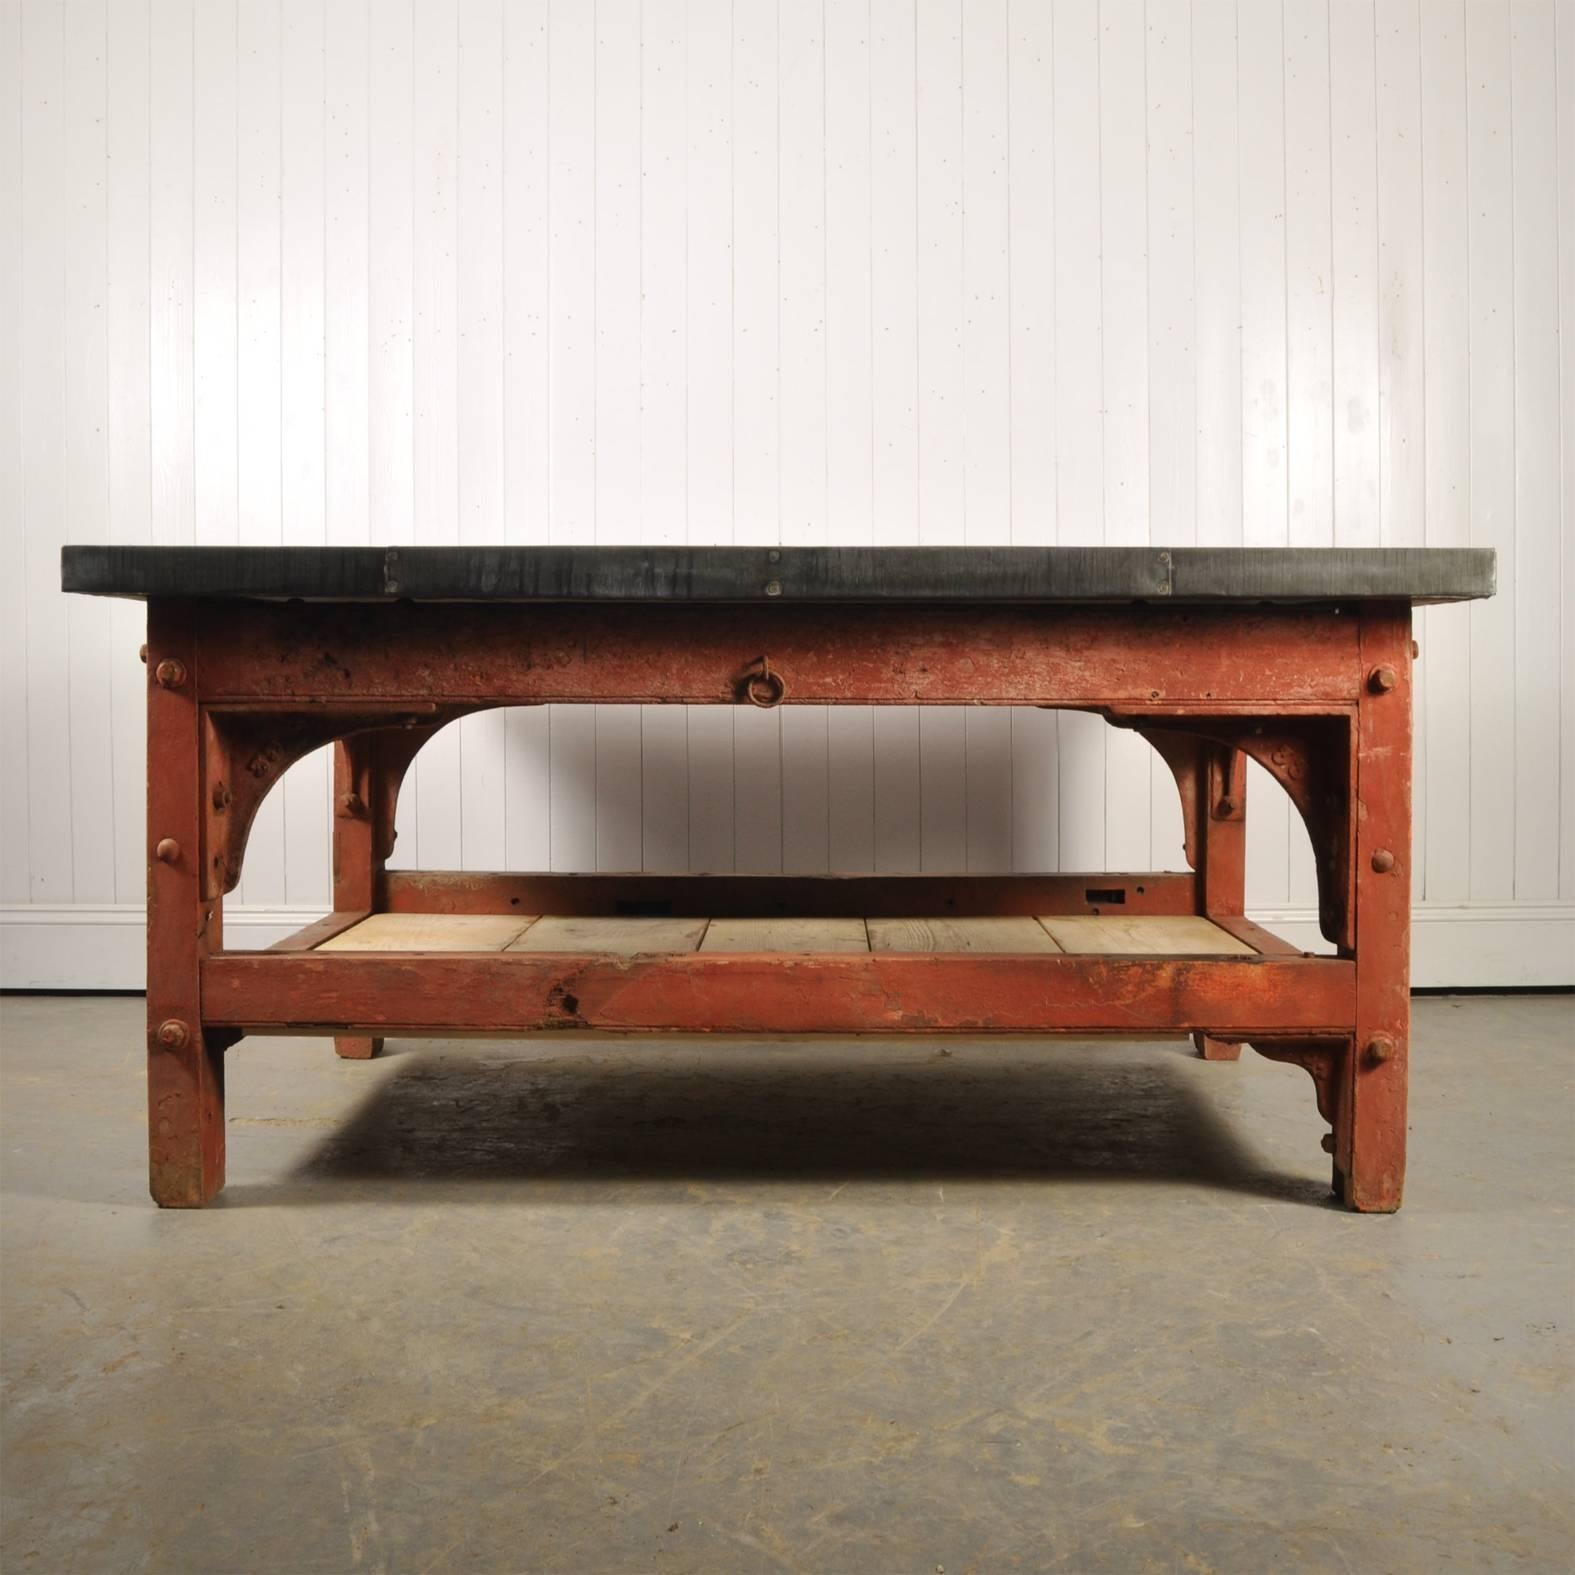 British Industrial 'Saw Mill' Red Table Base with New Zinc Top, circa 1910 For Sale